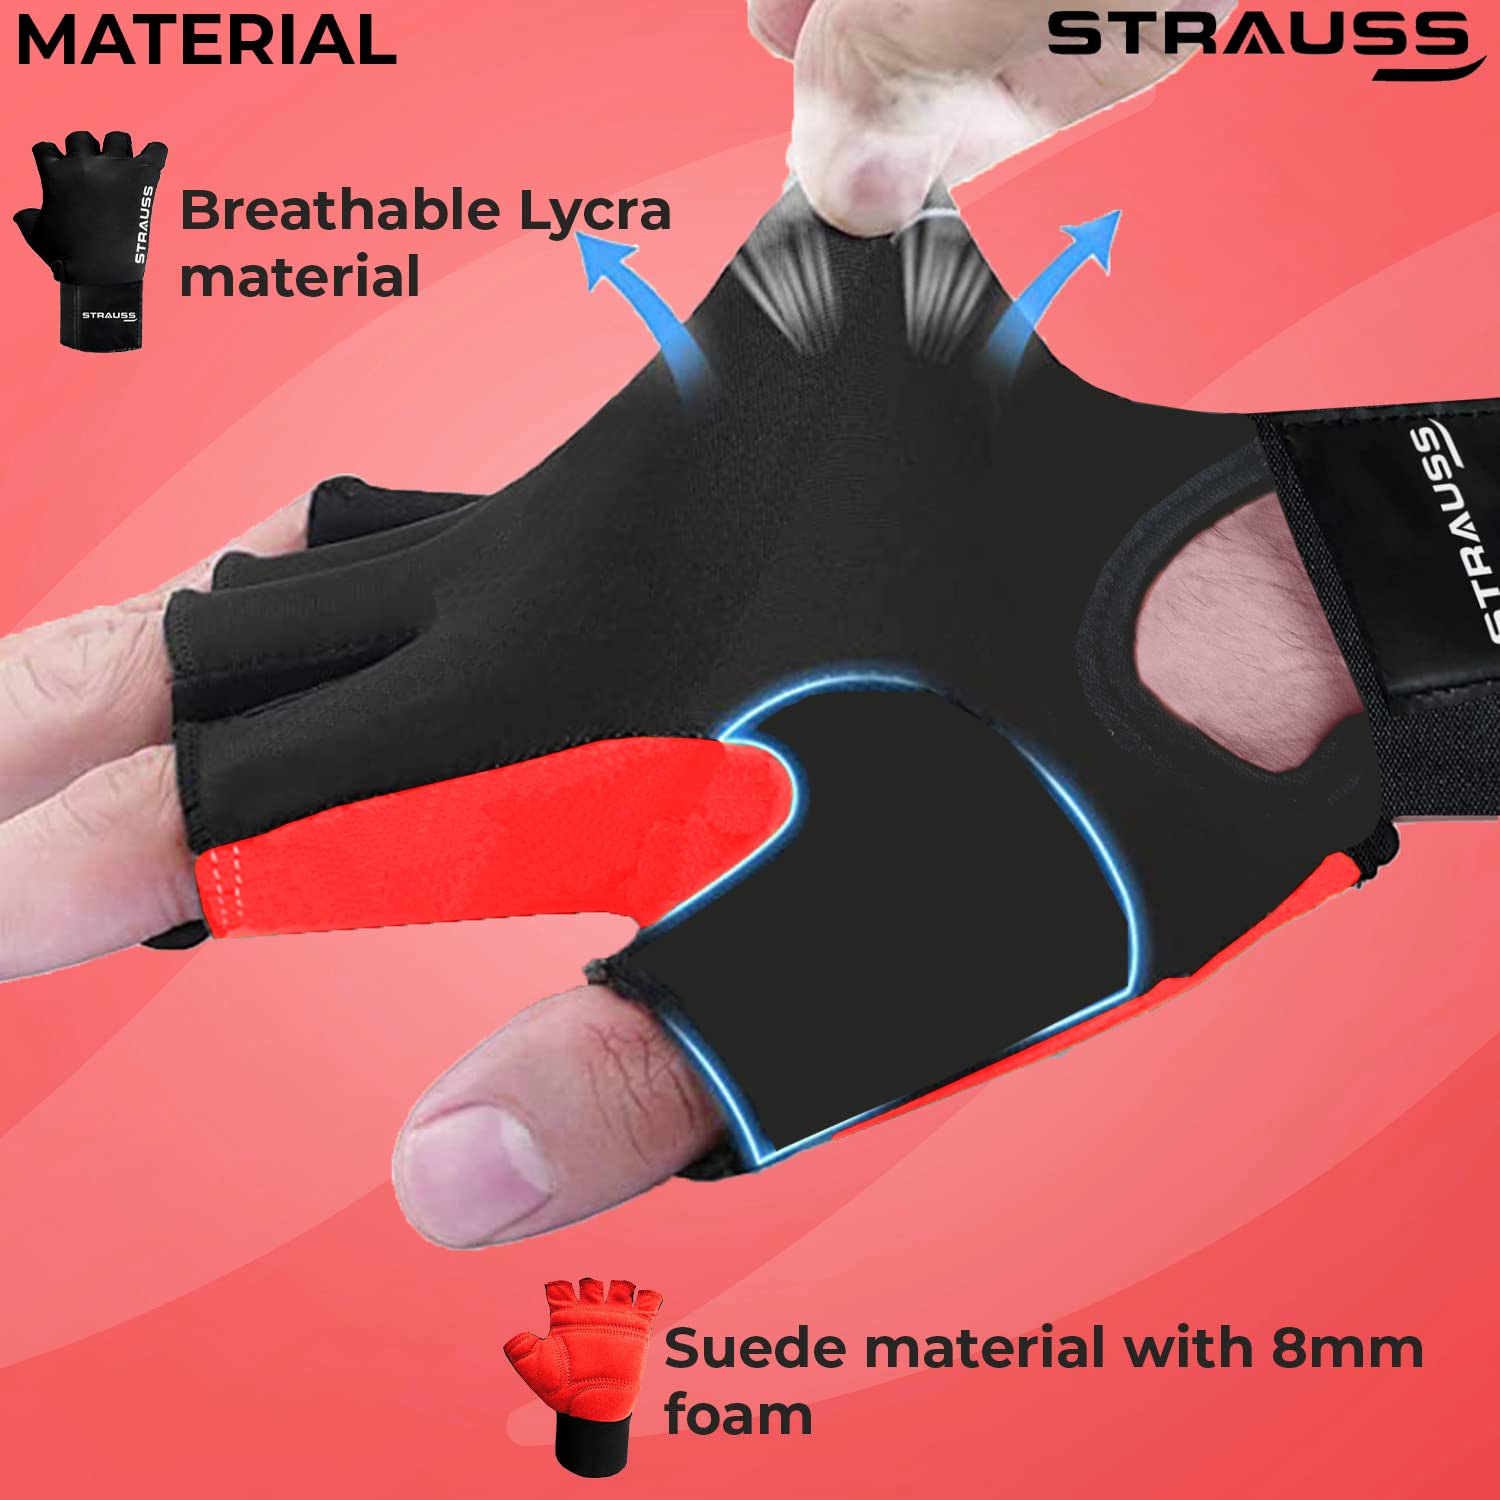 STRAUSS Suede Gym Gloves for Weightlifting, Training, Cycling, Exercise & Gym | Half Finger Design, 8mm Foam Cushioning, Anti-Slip & Breathable Lycra Material, (Red/Black), (Large)